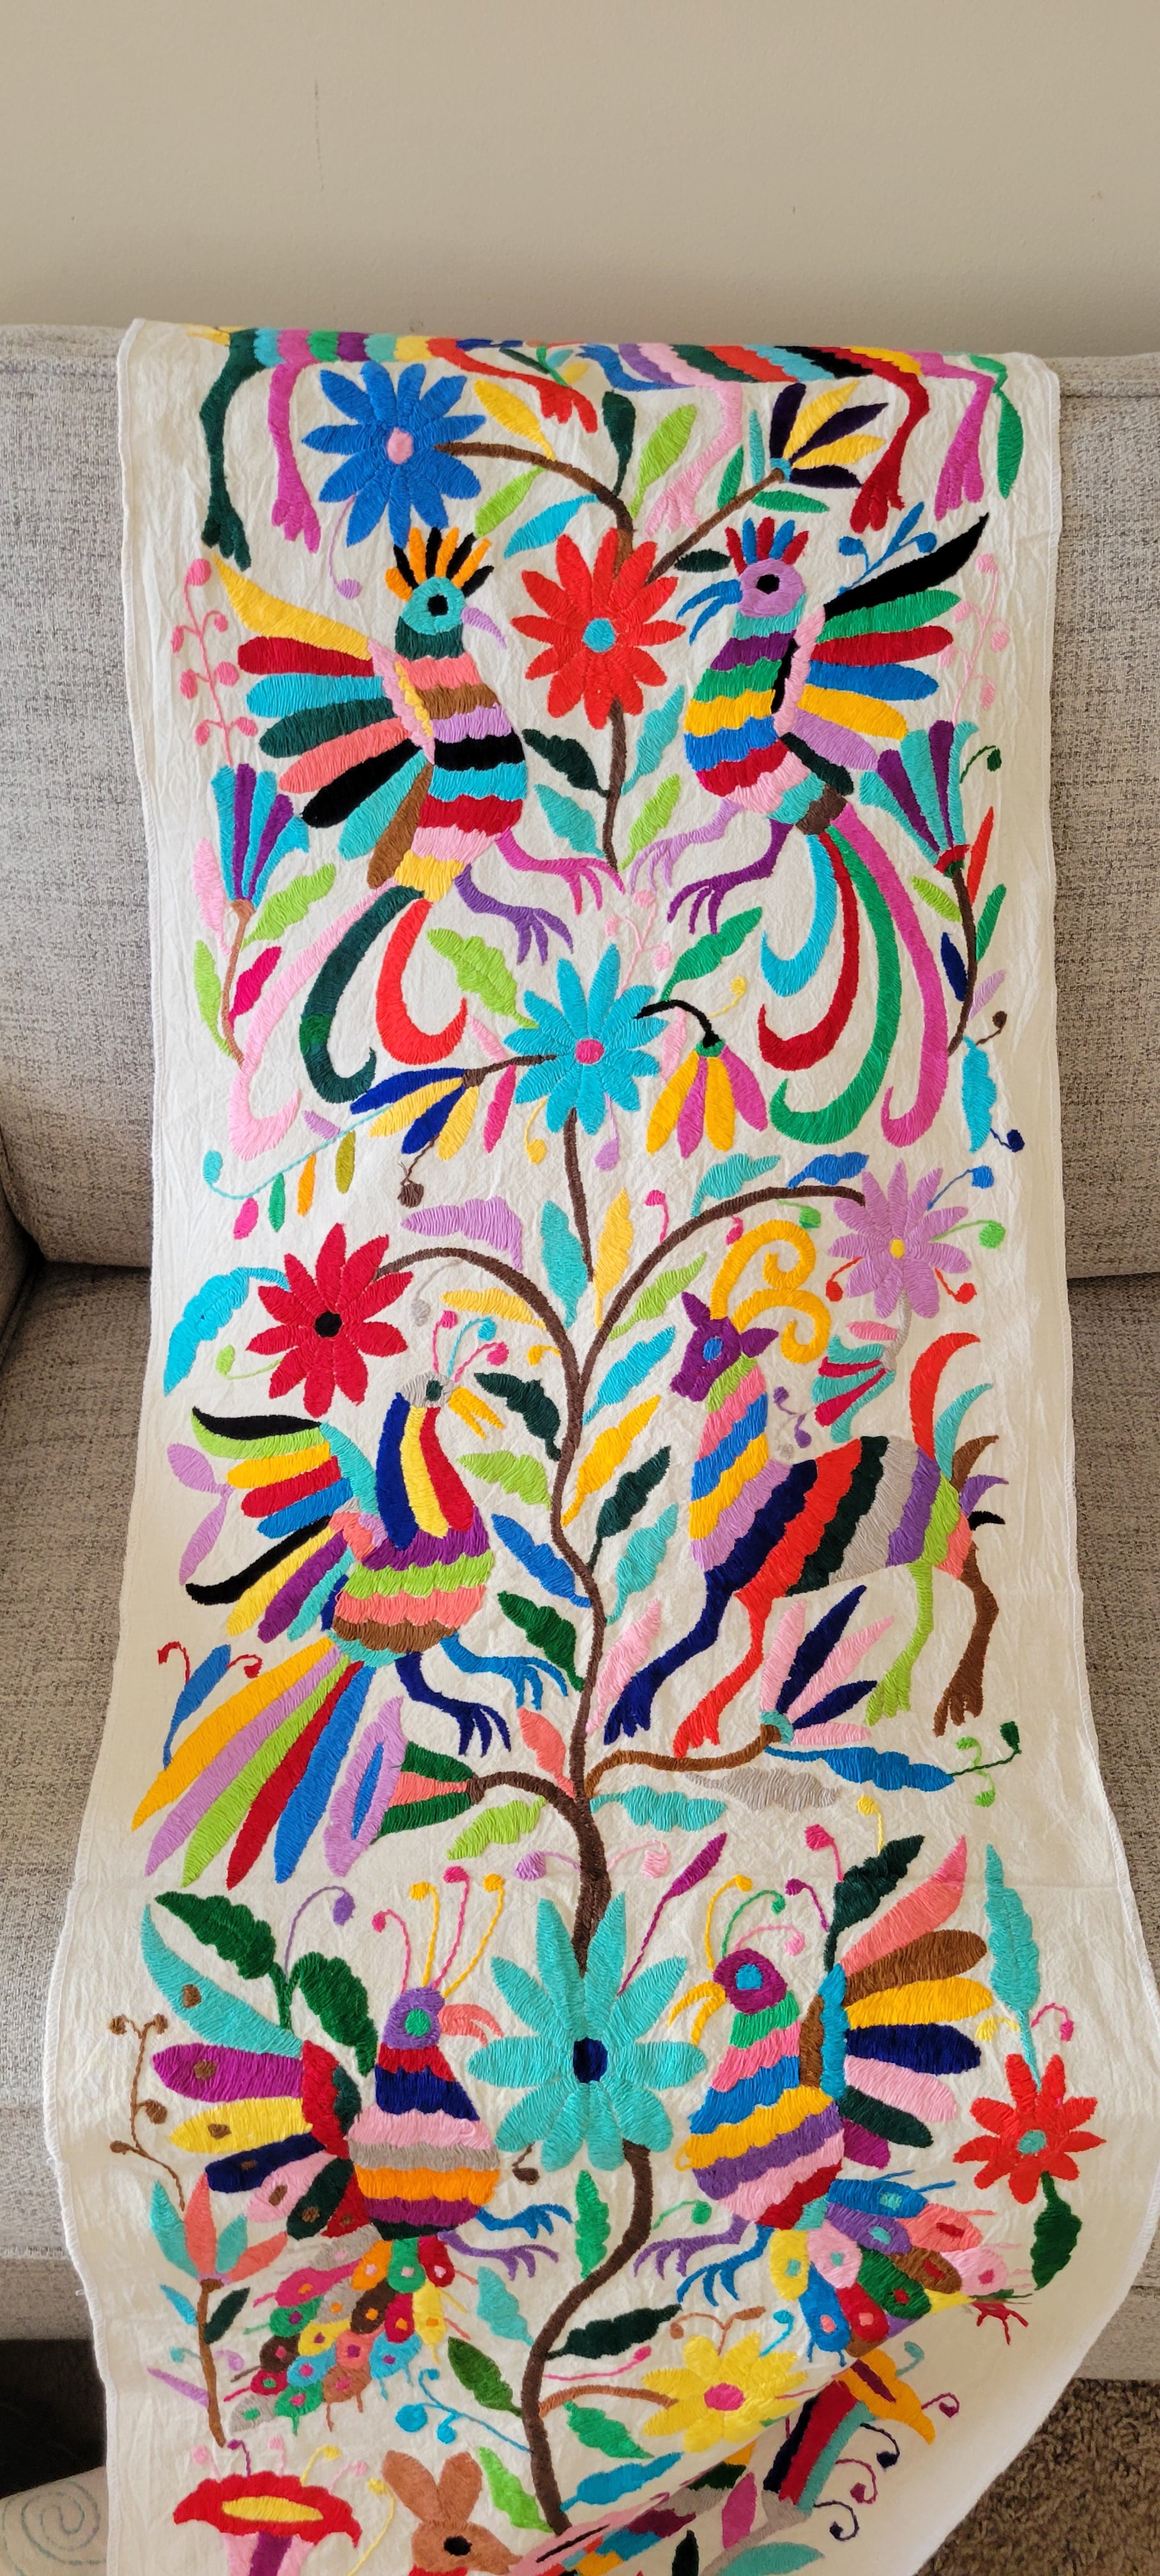 Authentic Multicolor Mexican Embroidery Table Runner. Handmade in Mexico. We package and ship from the USA. Buy now at www.felipeandgrace.com. 